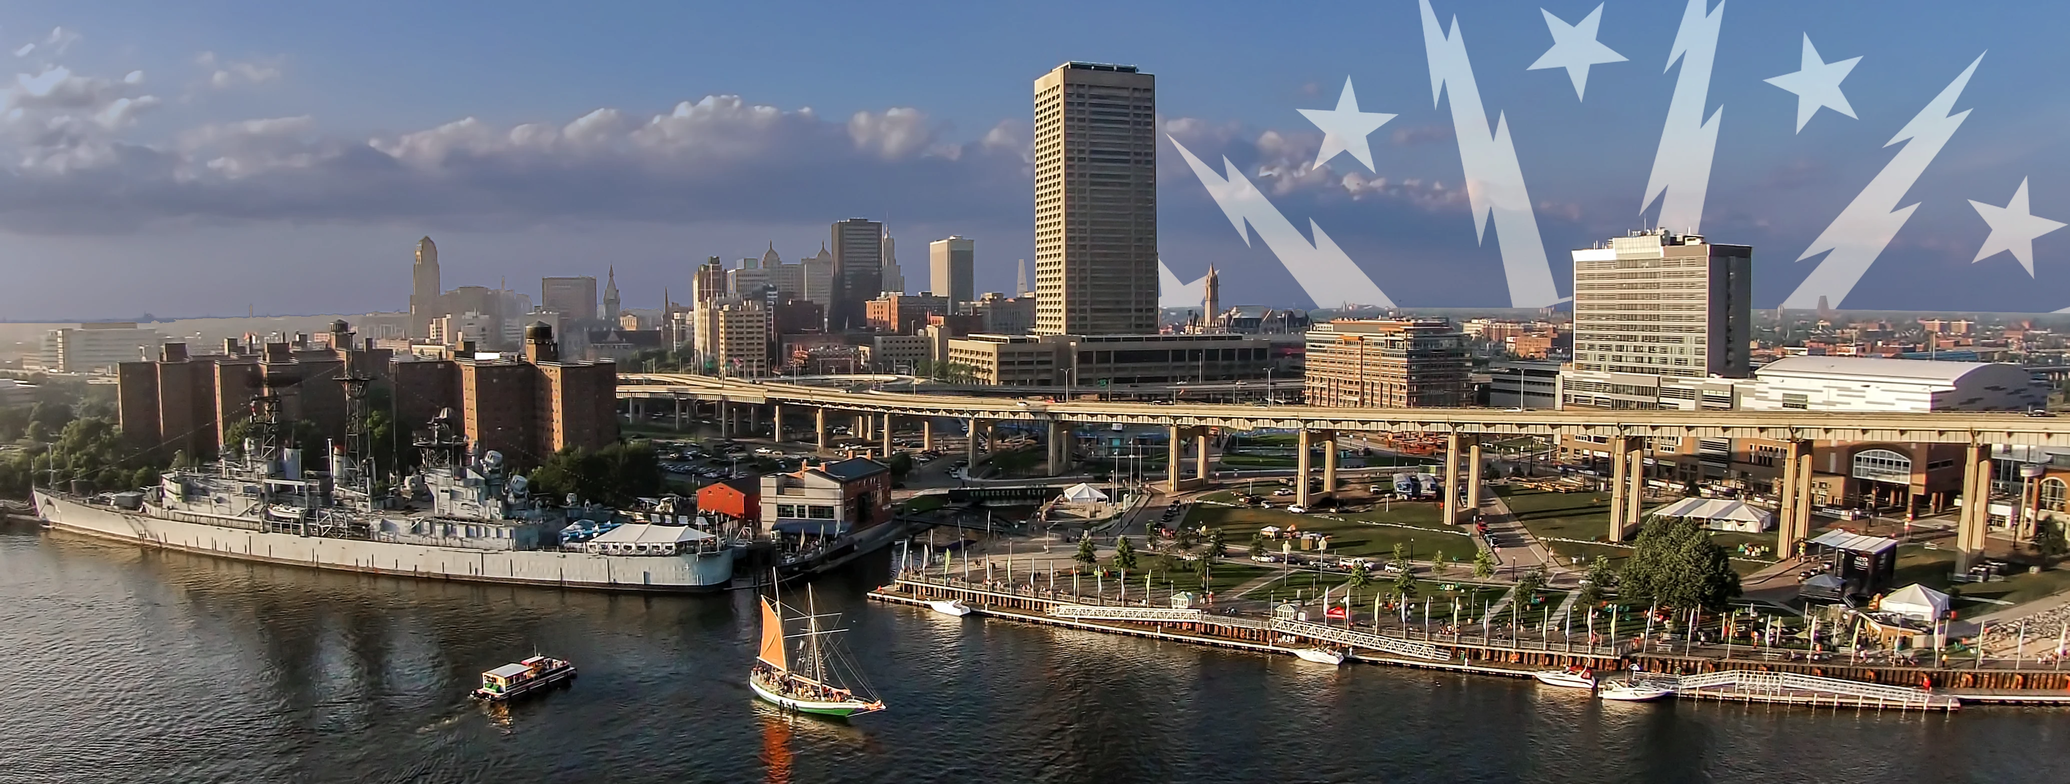 The skyline of Buffalo, New York. White lightning bolts and stars are in the background, representing the Buffalo city flag.